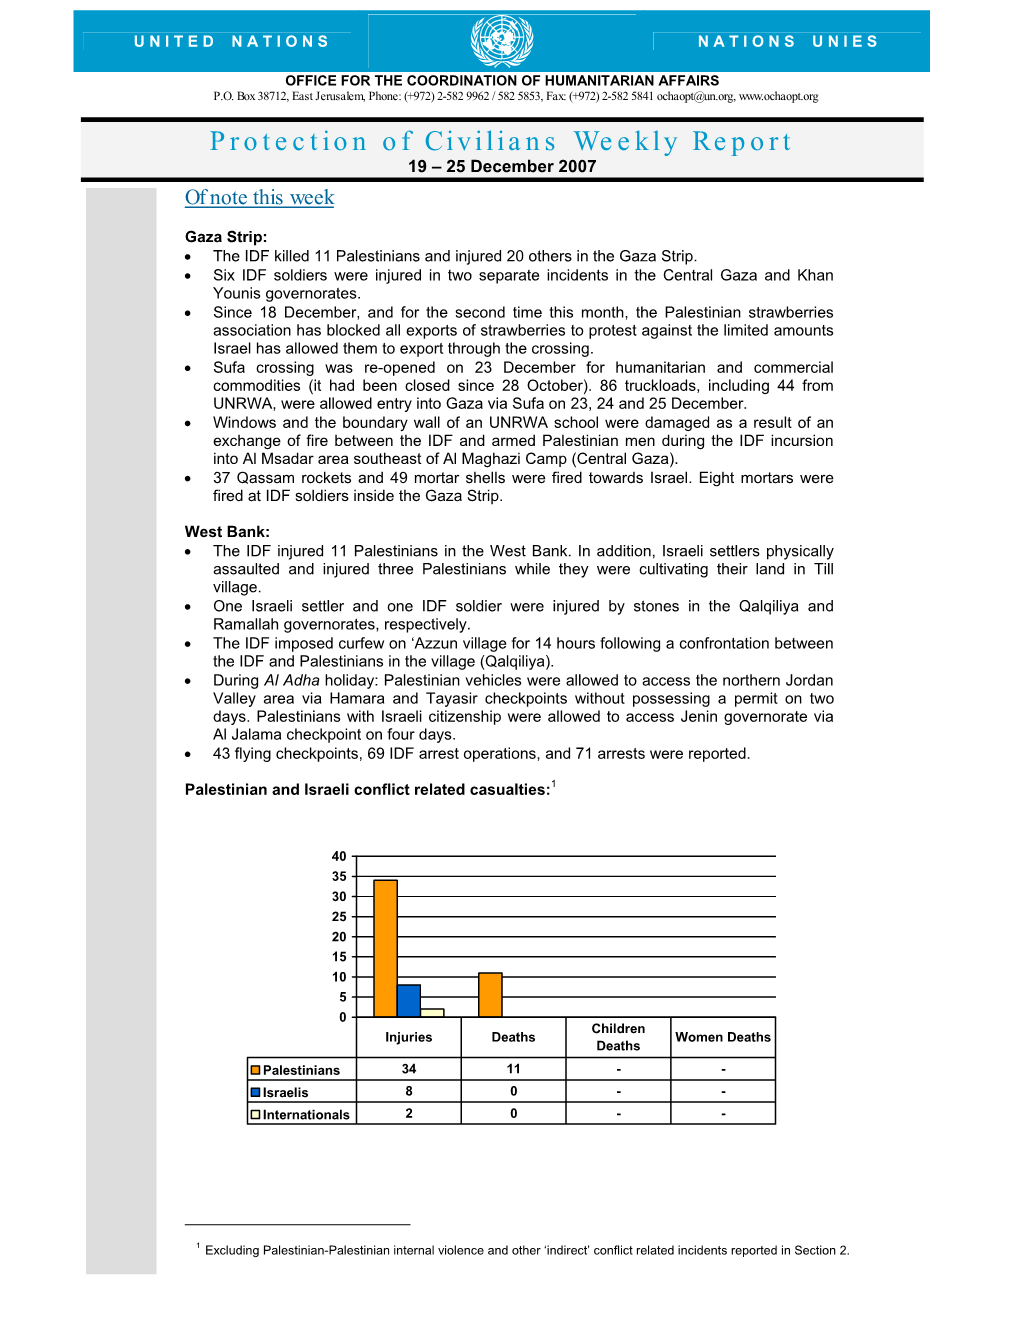 Protection of Civilians Weekly Report 19 – 25 December 2007 of Note This Week